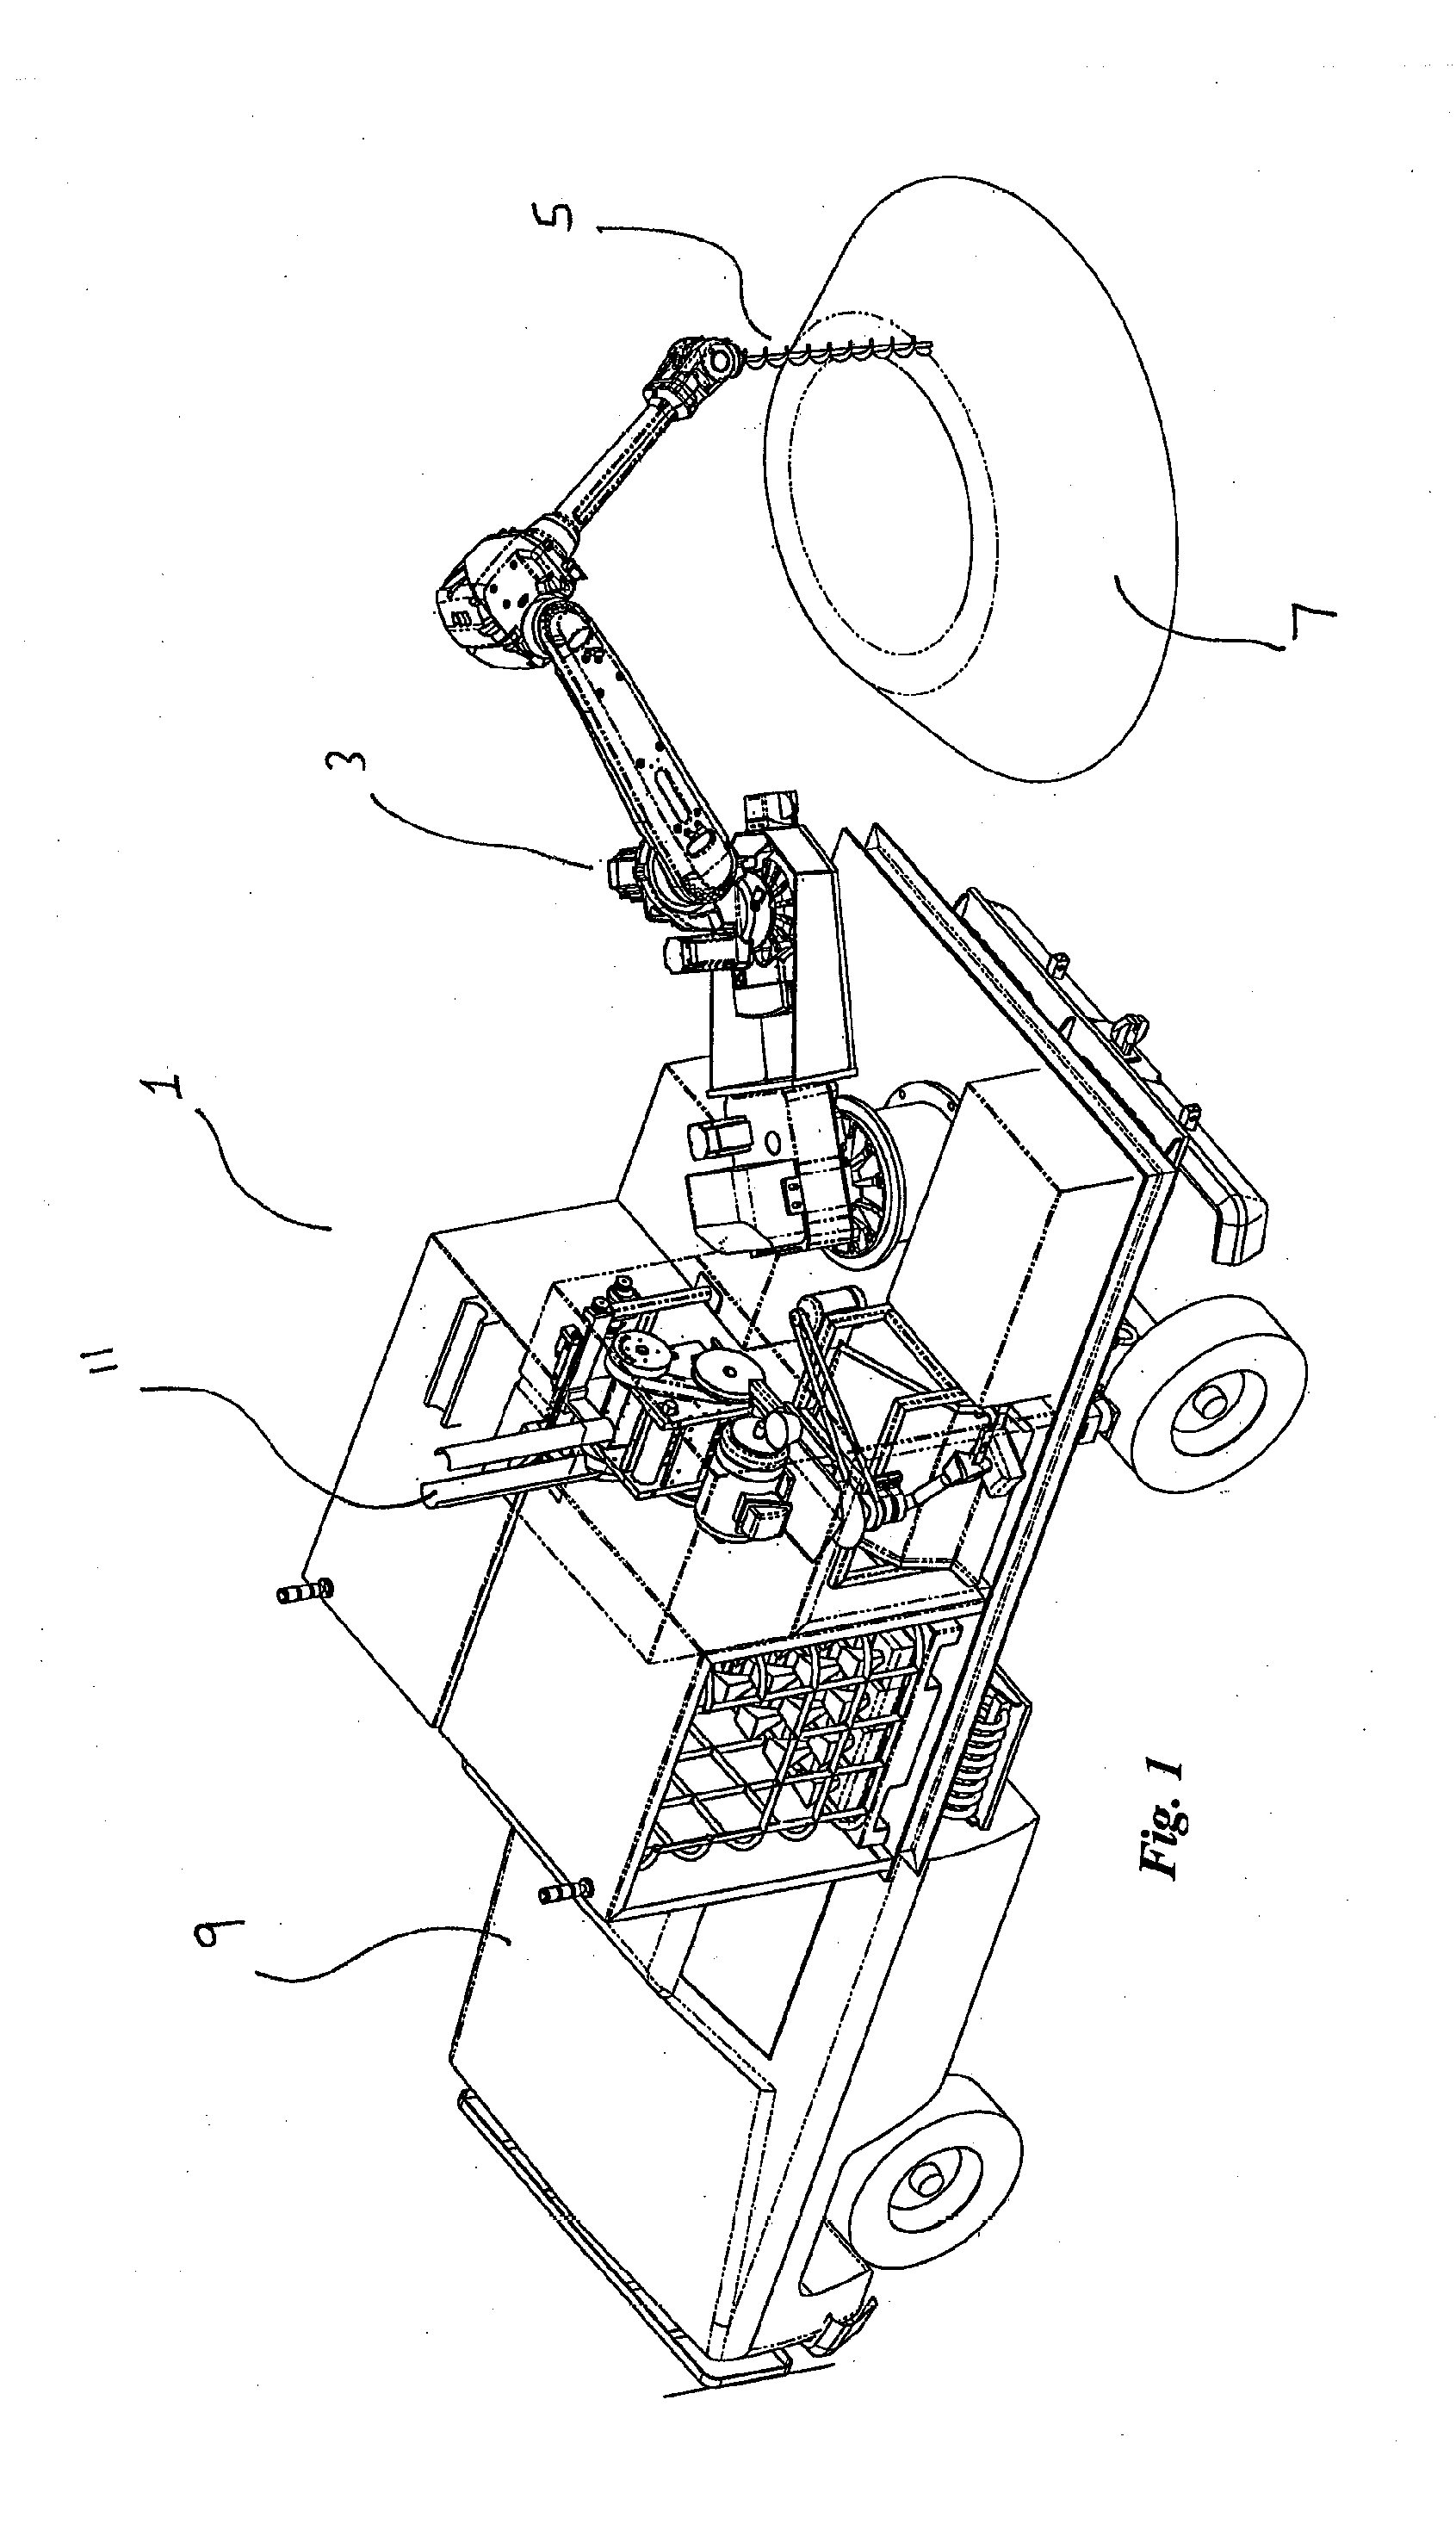 Self Contained Sampling and Processing Facility